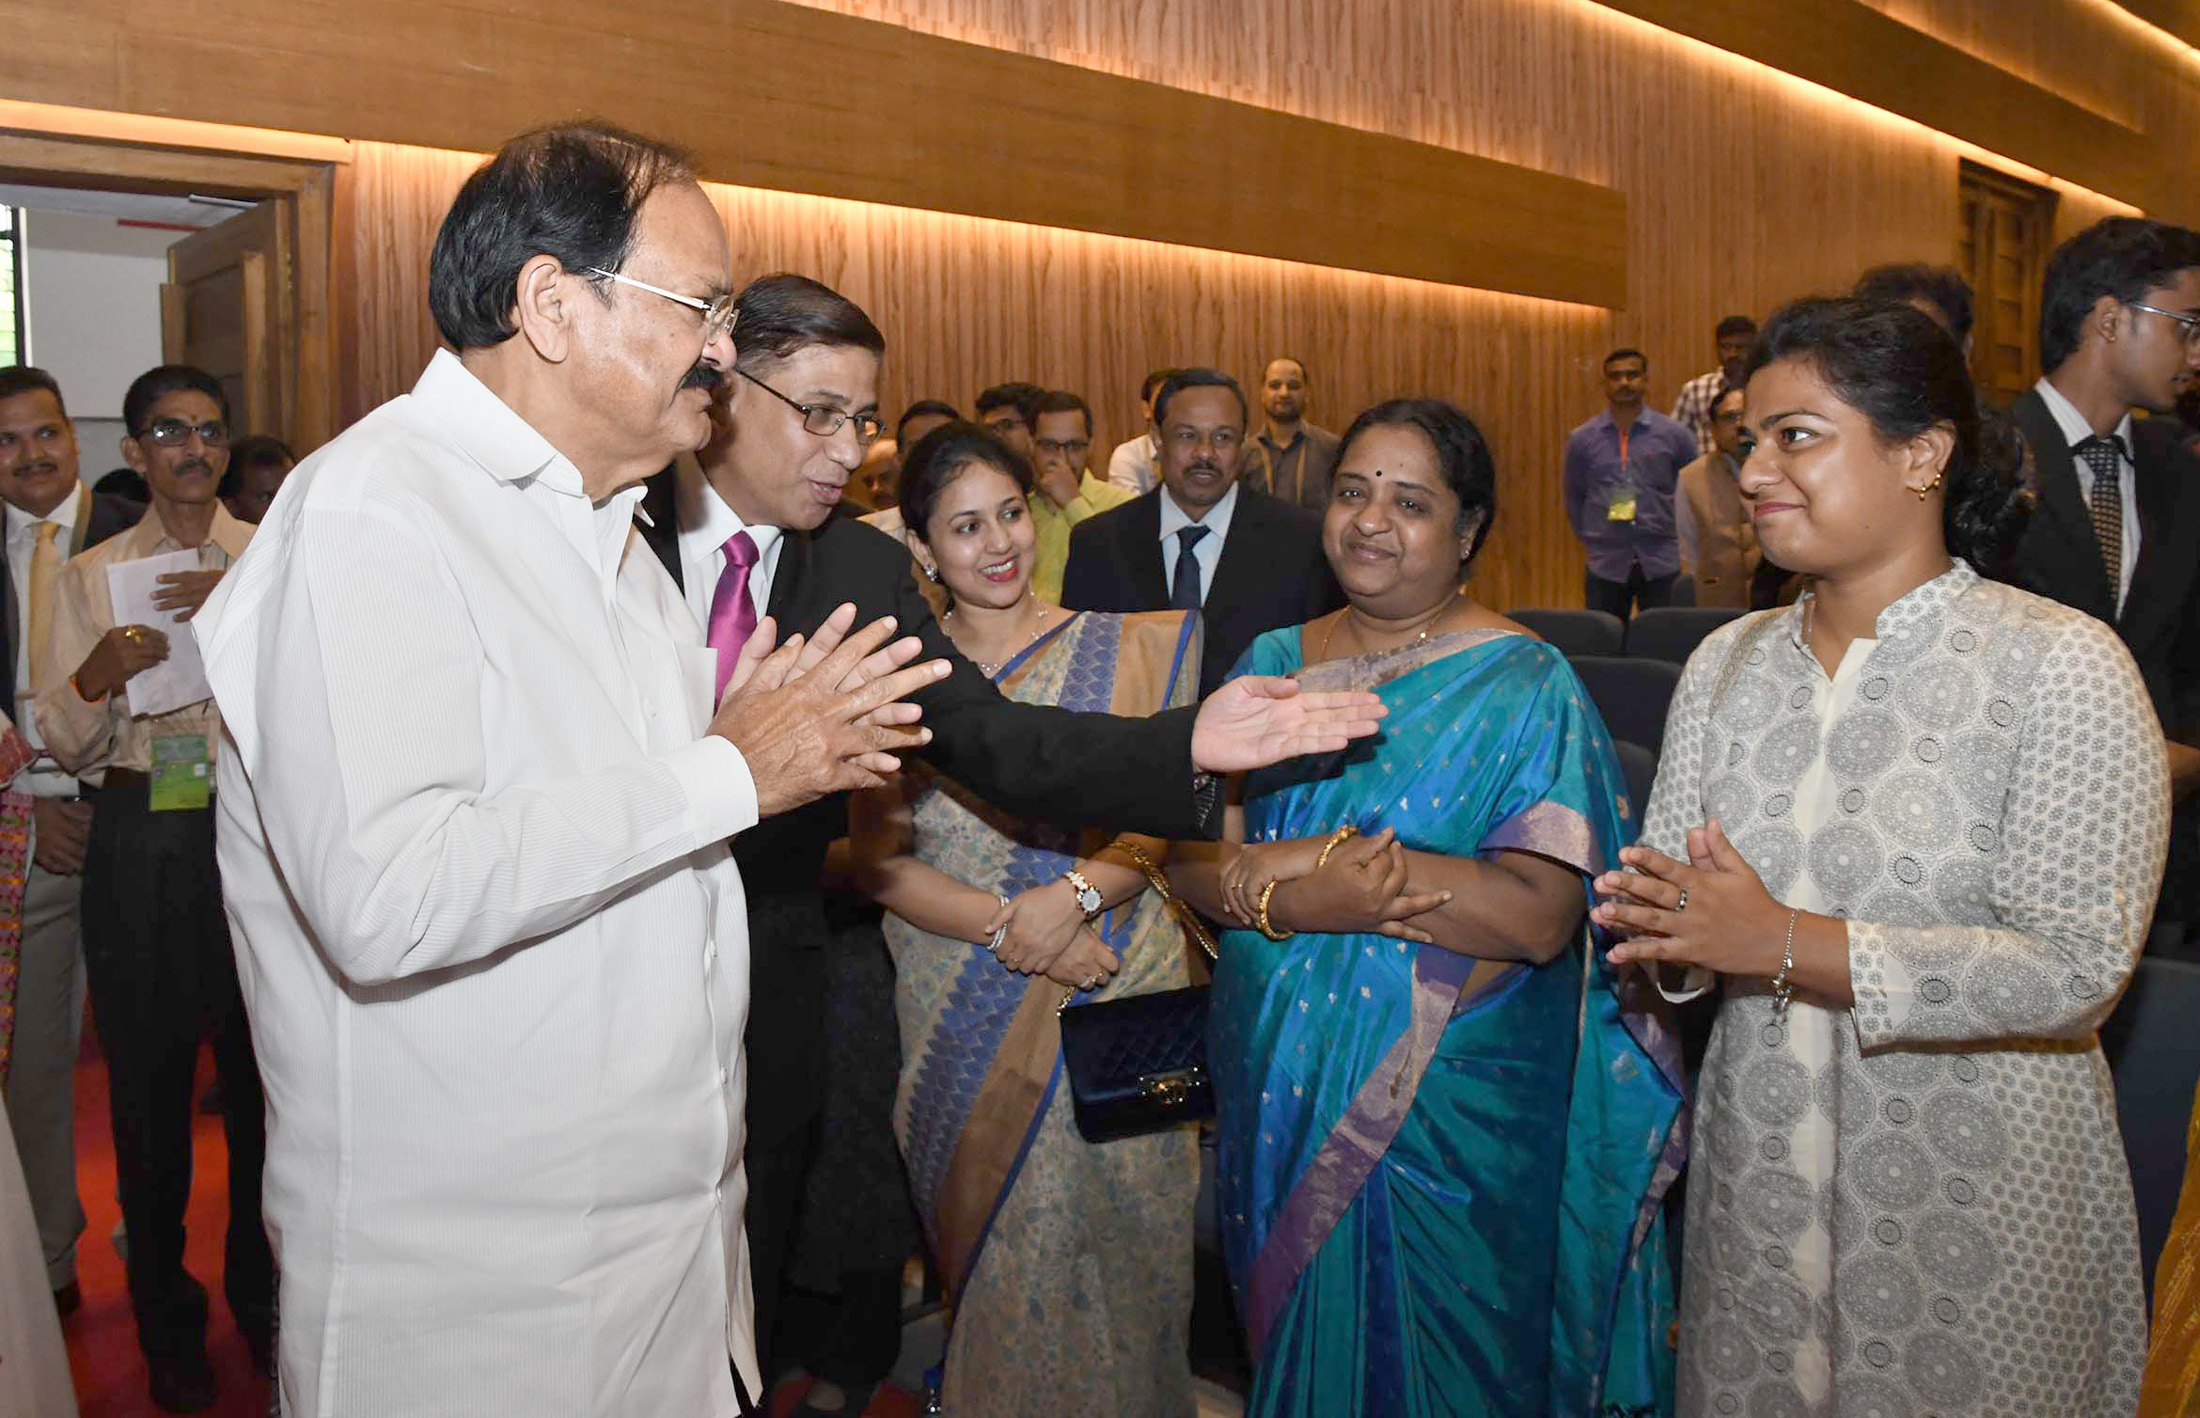 The Vice President, Shri M. Venkaiah Naidu interacting with the Faculty of NALSAR at the 78th Session of Institute of International Law, at NALSAR University of Law, in Hyderabad on September 03, 2017.